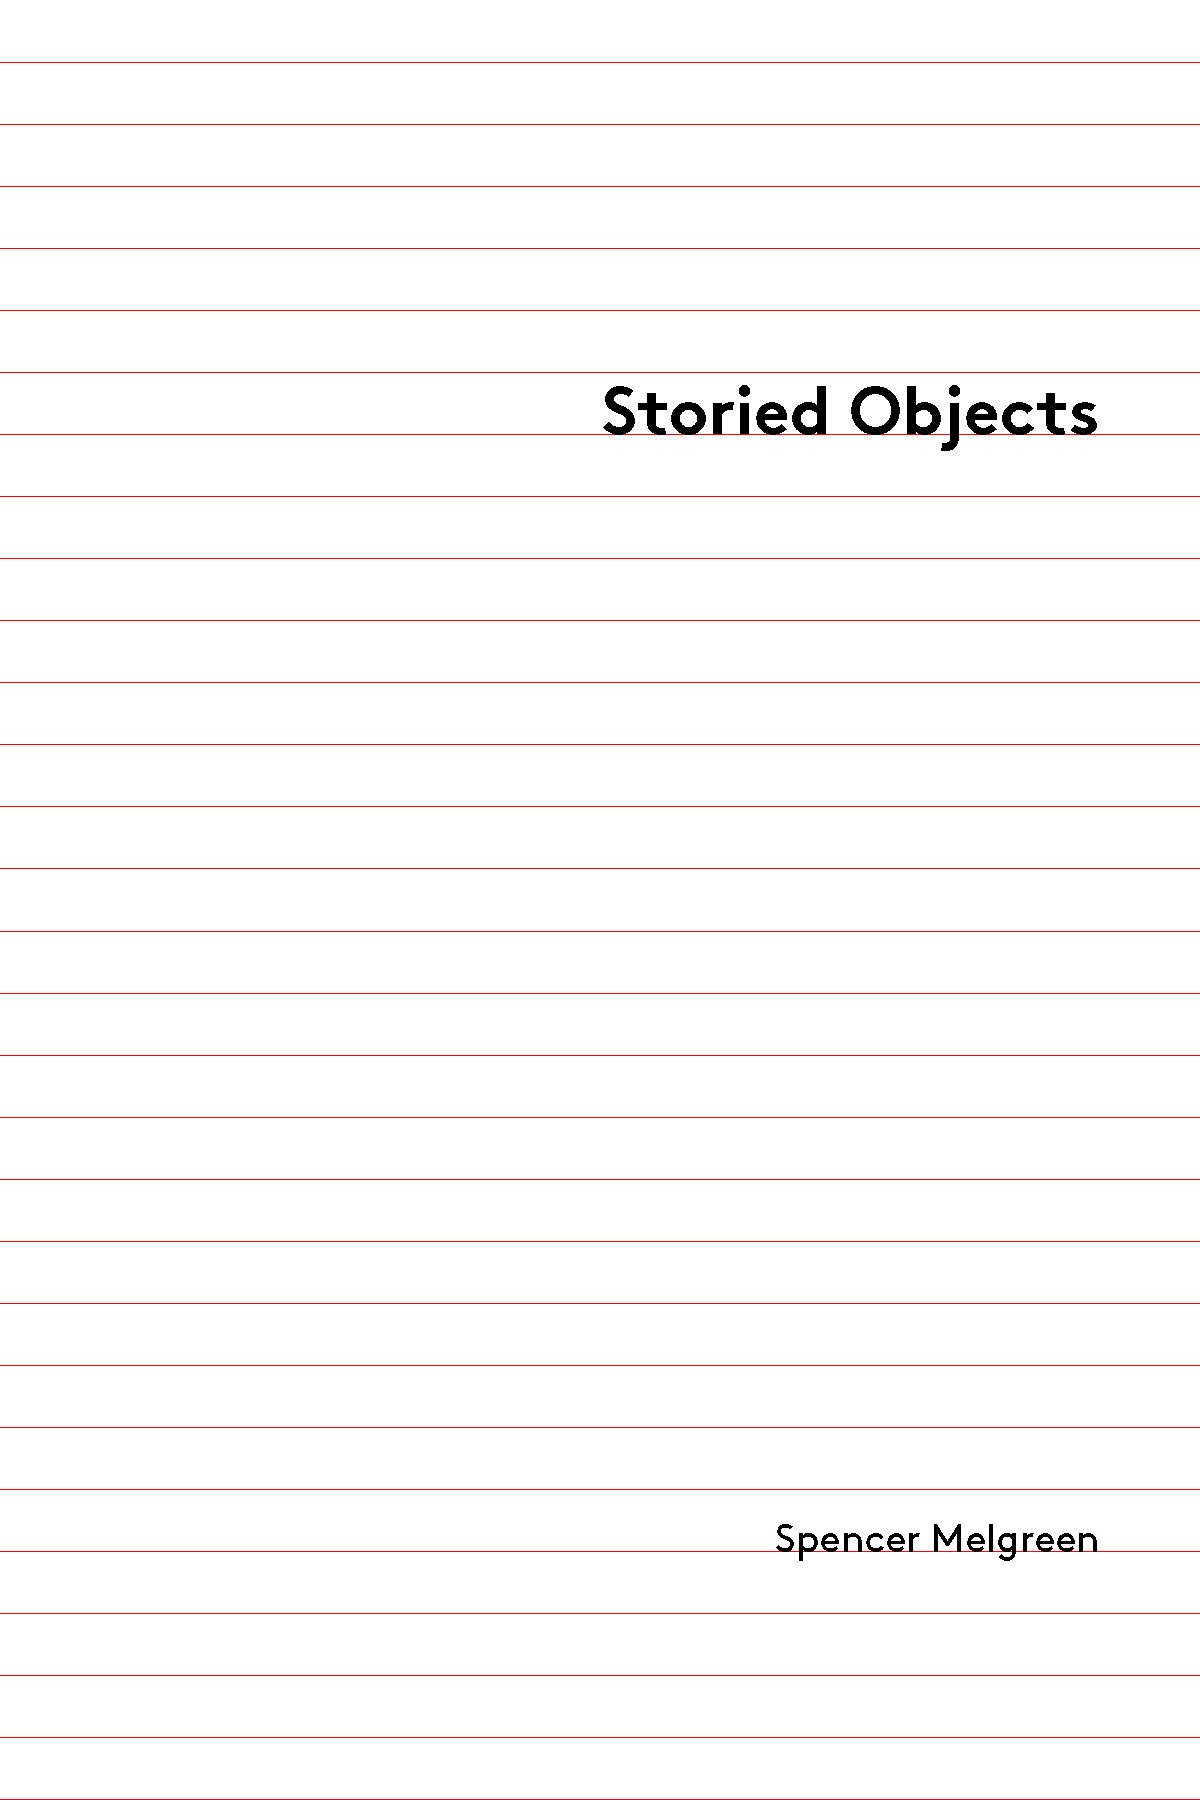 Storied object_Book_Spencer_Melgreen_Page_01.jpg